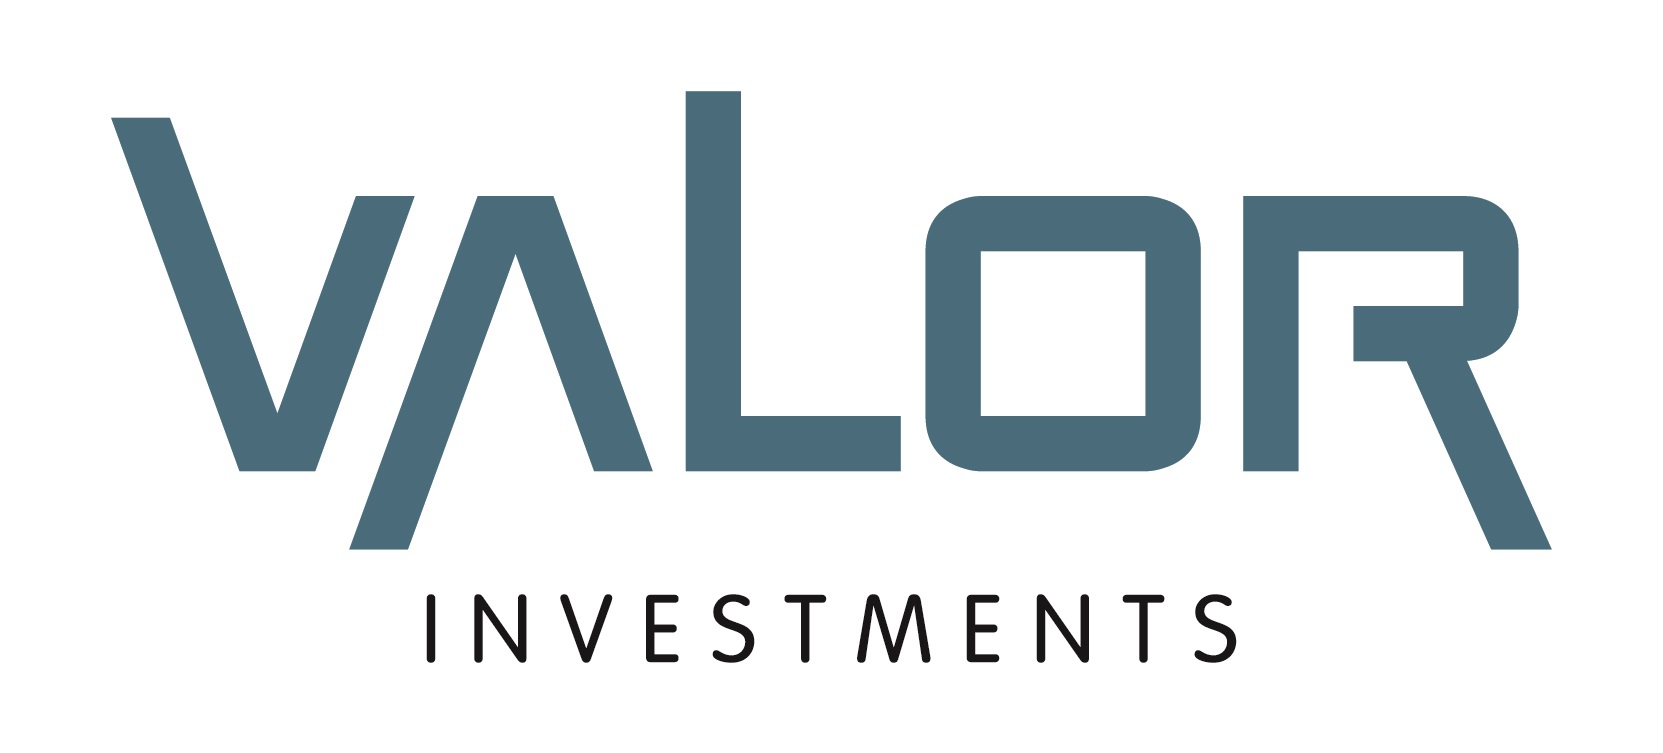 Valor investments